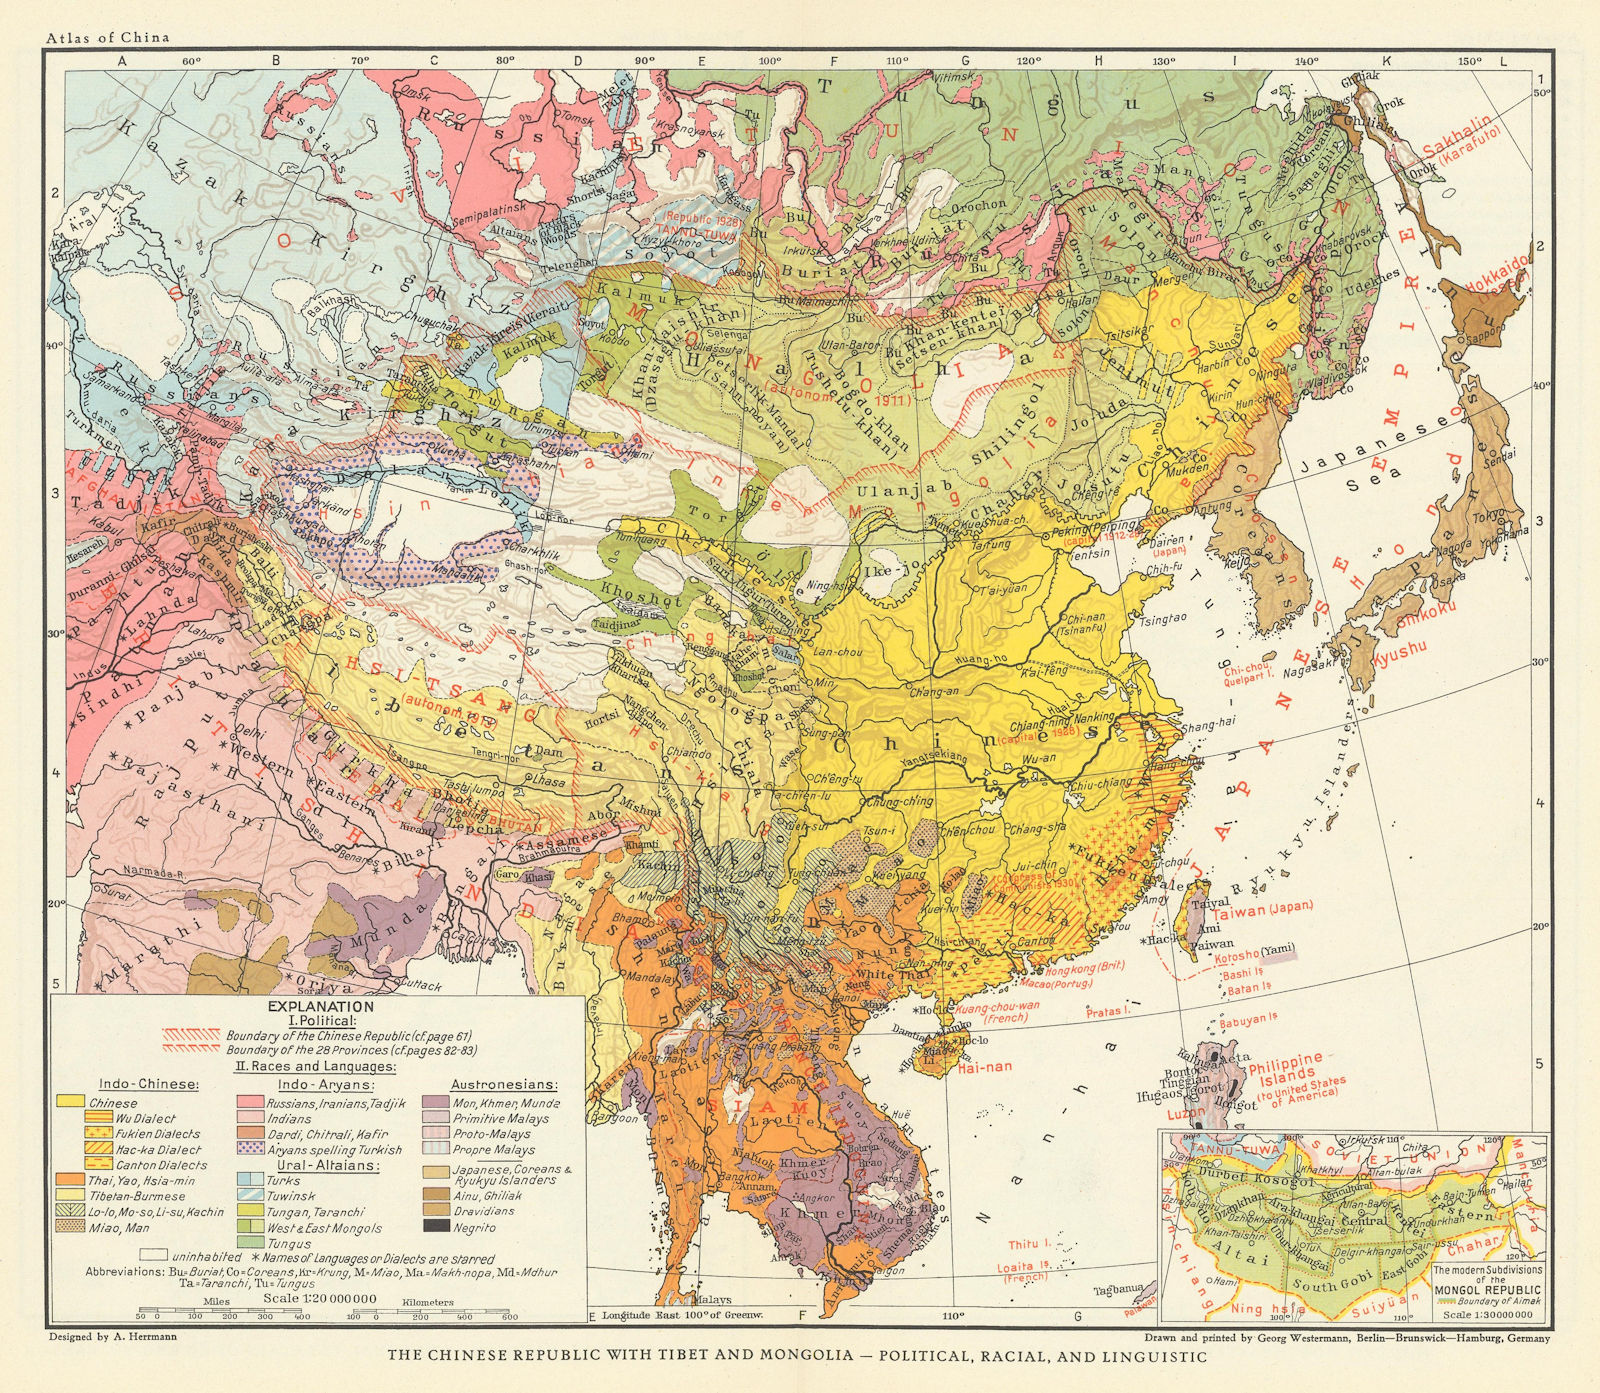 China & East Asia. Political Ethnic Racial Linguistic. Chinese Aryans 1935 map